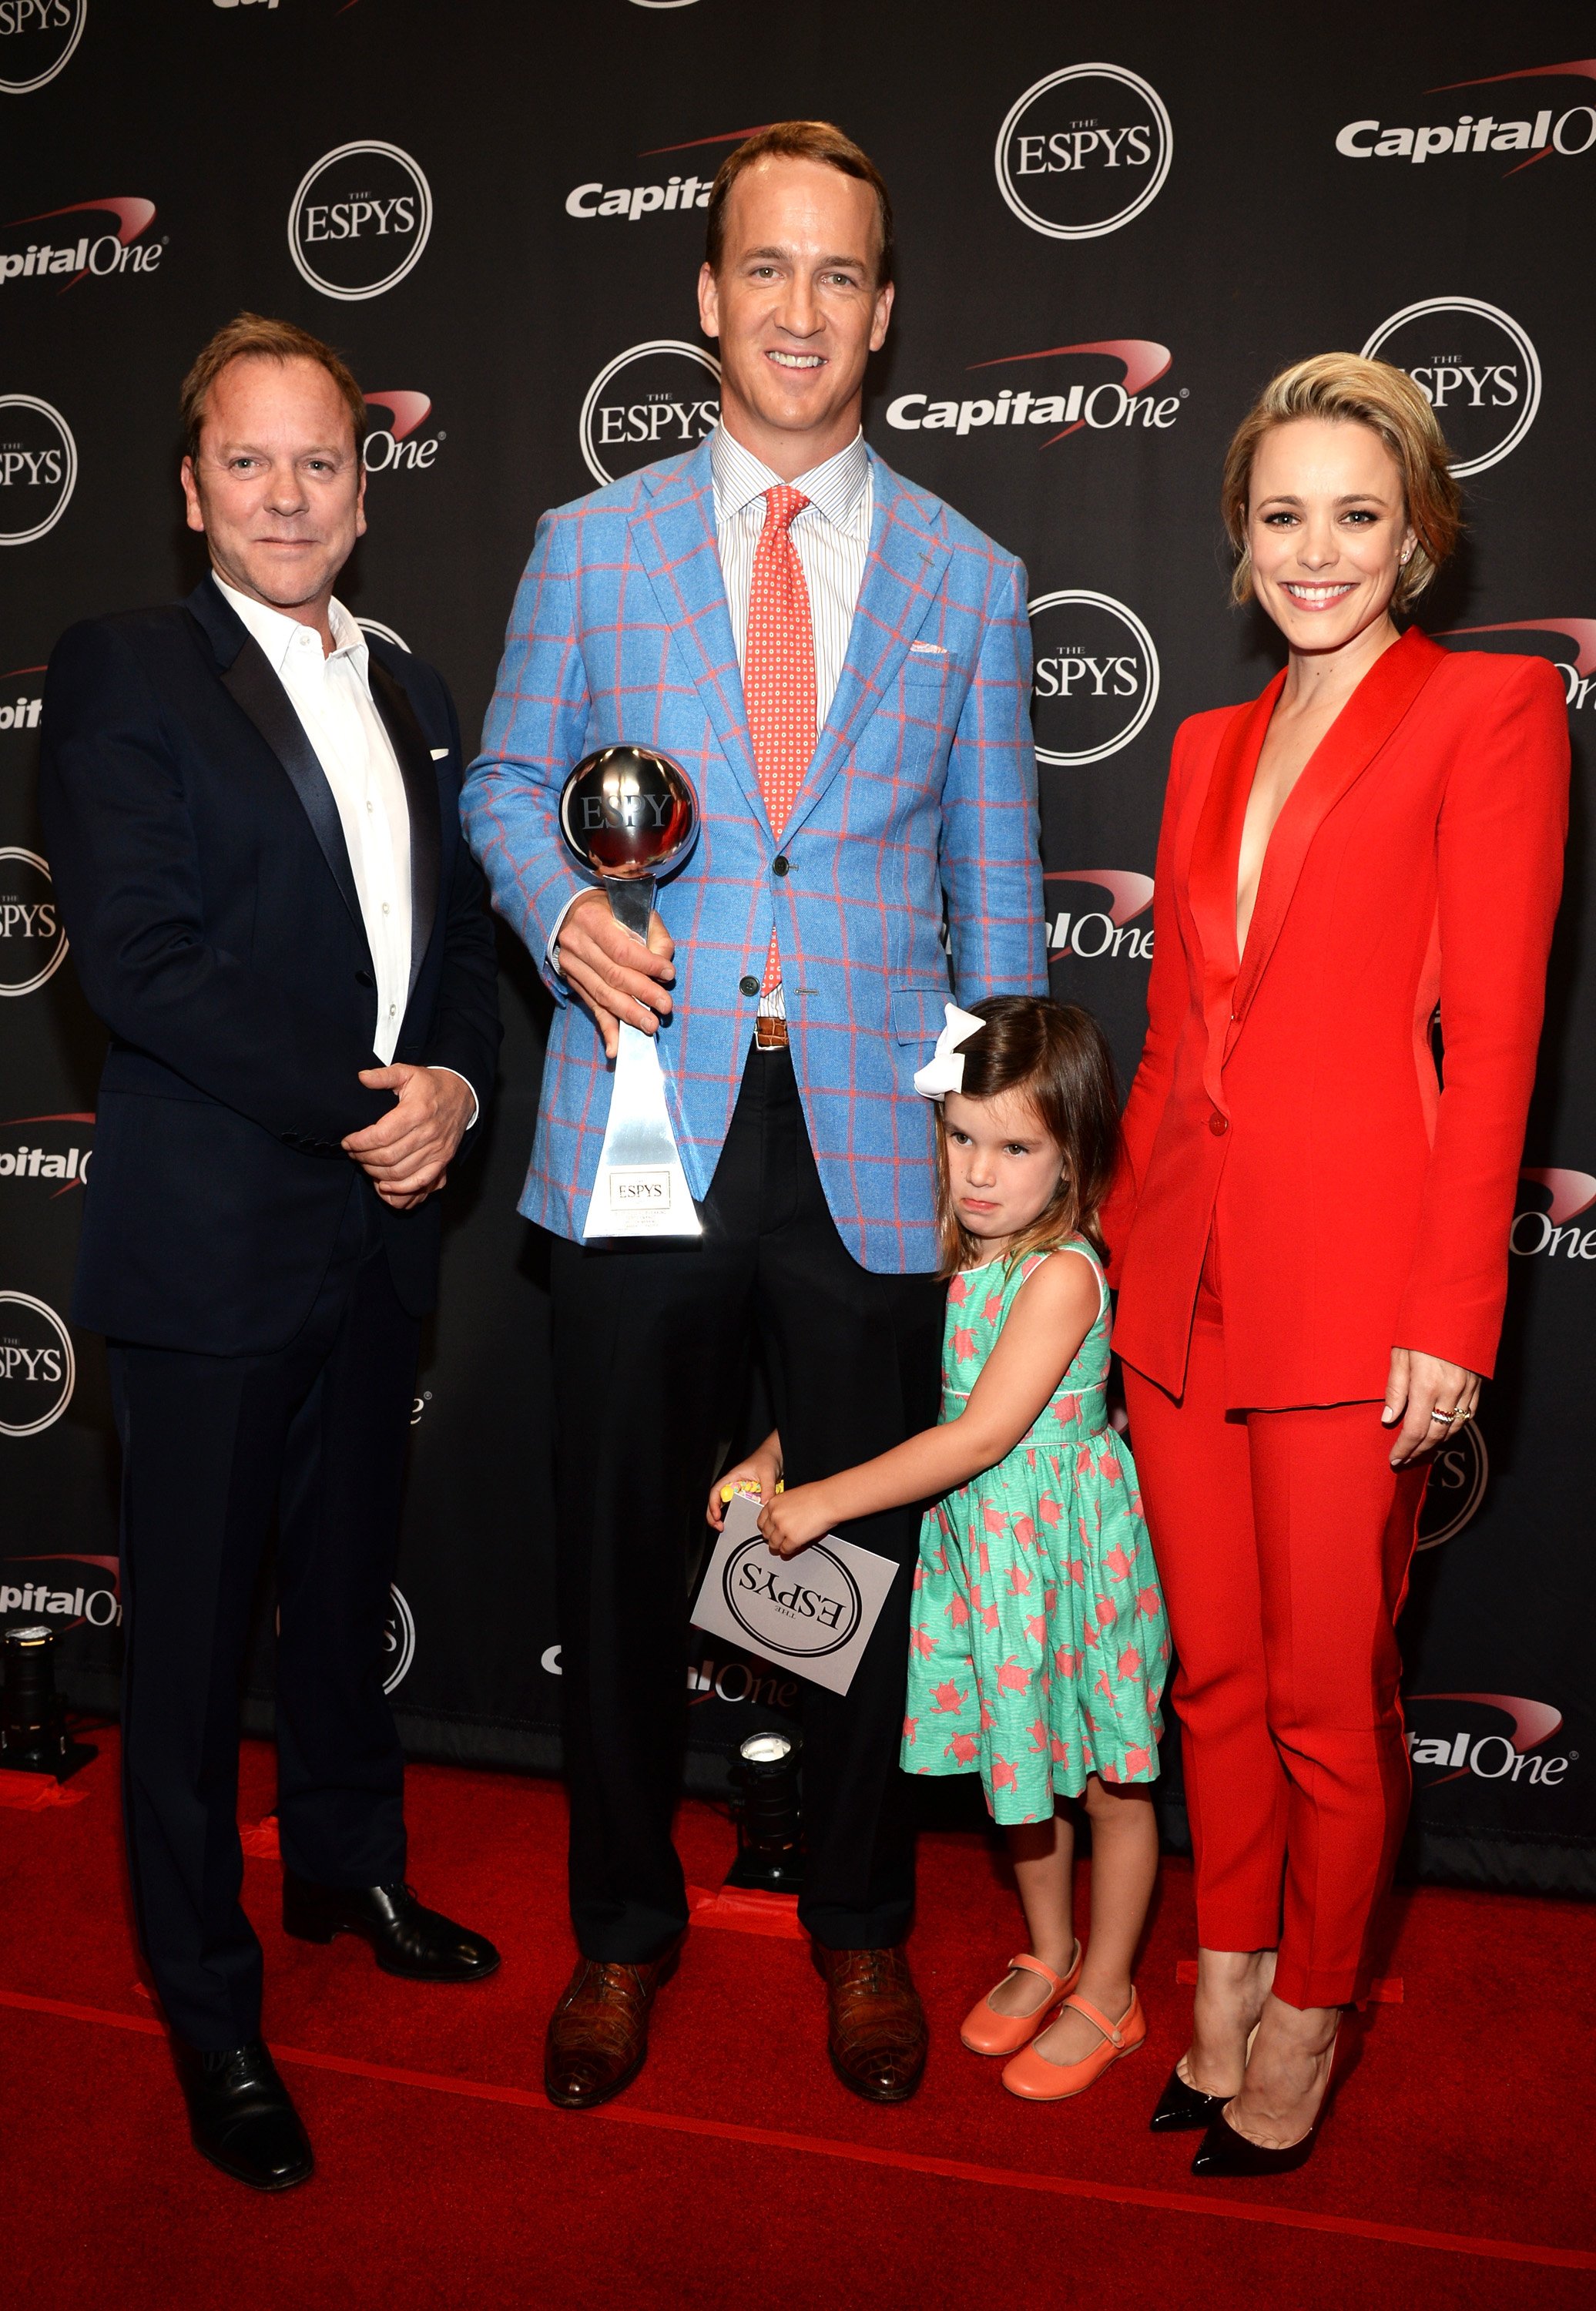 Actor Kiefer Sutherland, NFL player Peyton Manning with his daughter Mosley Thompson Manning and actress Rachel McAdams attend The 2015 ESPYS at Microsoft Theater on July 15, 2015, in Los Angeles, California. | Source: Getty Images